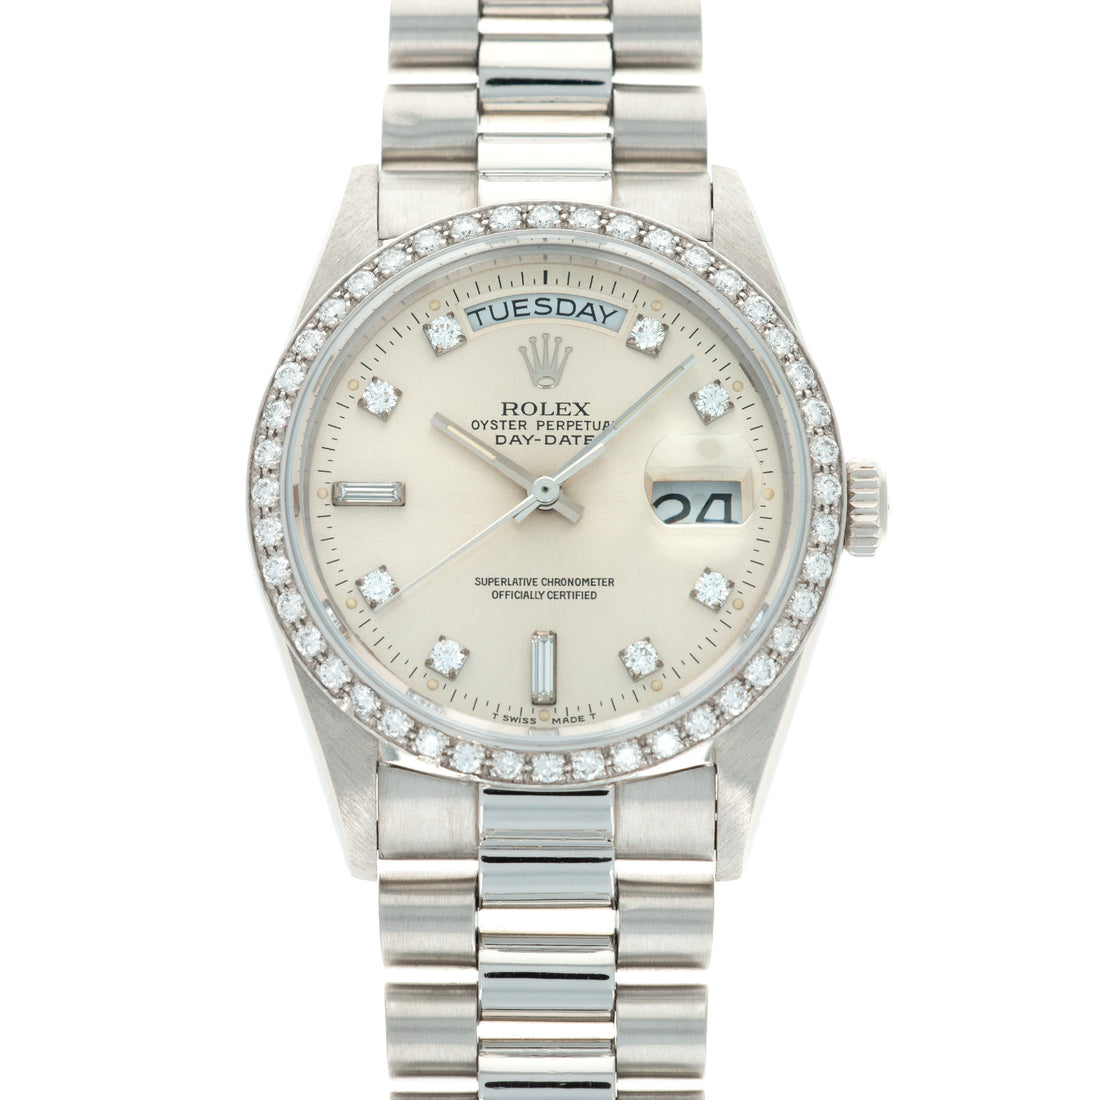 Rolex Platinum Day-Date Ref 18046 with Diamond Bezel and Diamond Dial